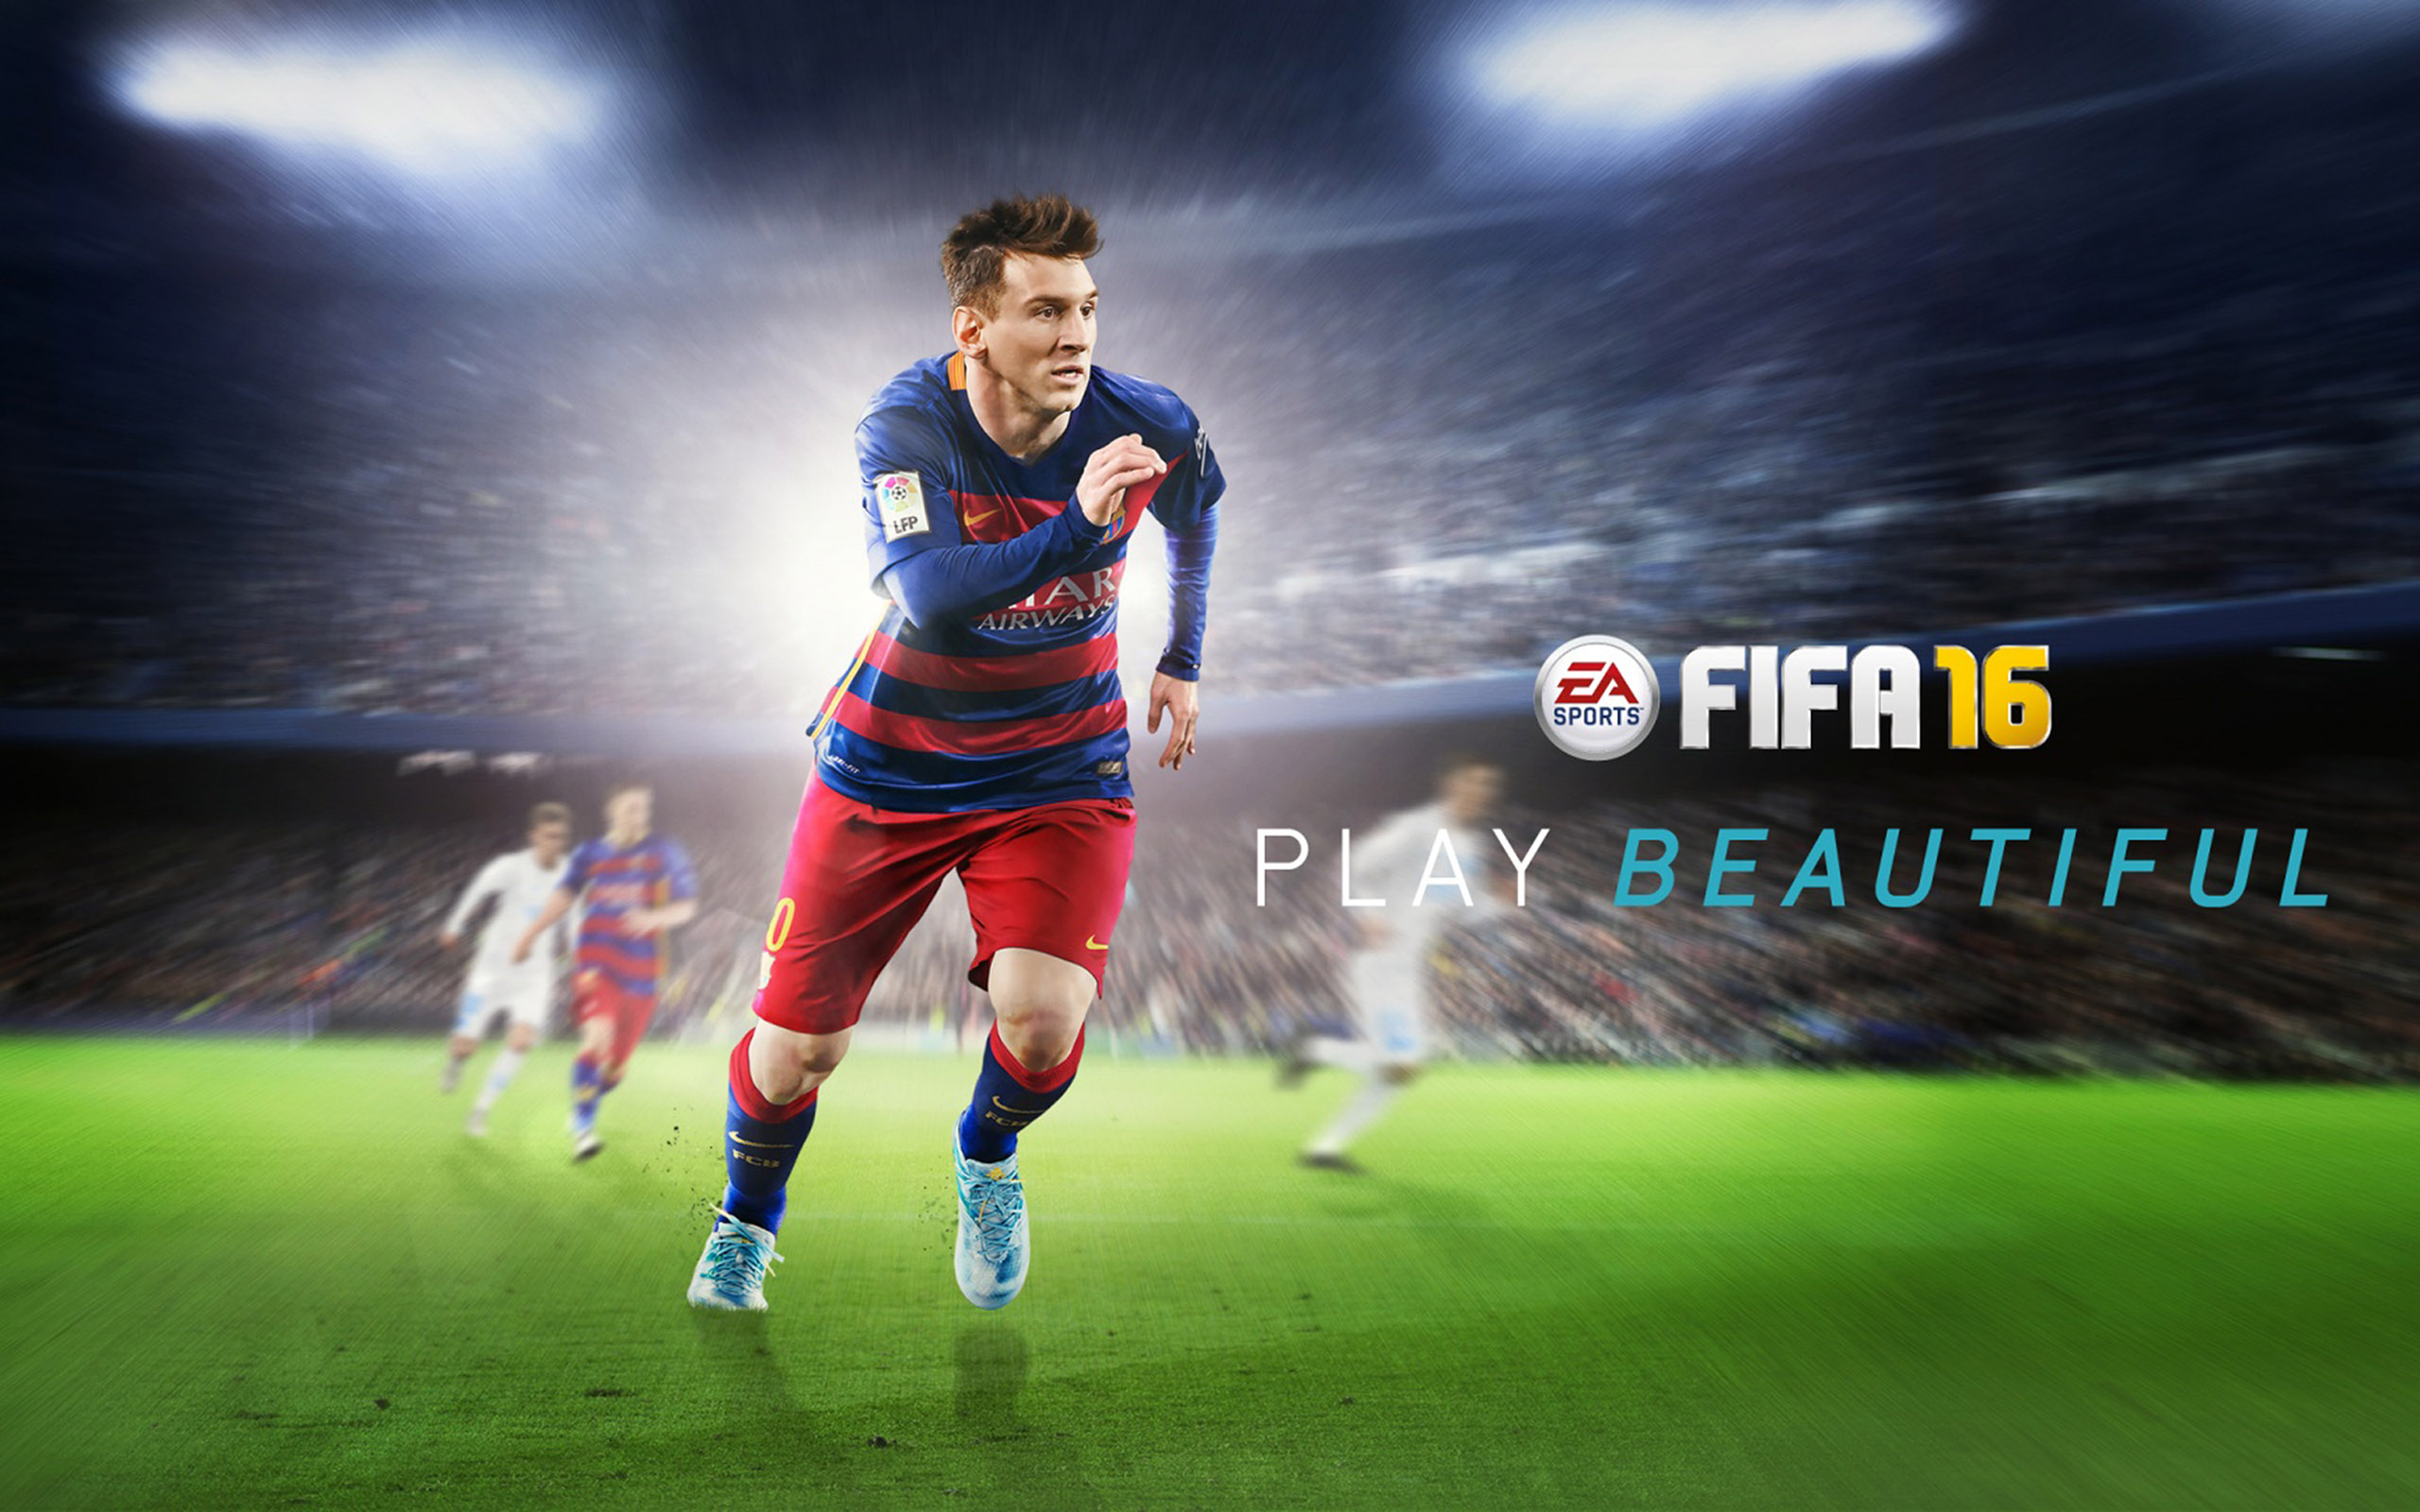 fifa 16 game poster lionel messi play beautiful wallpapers